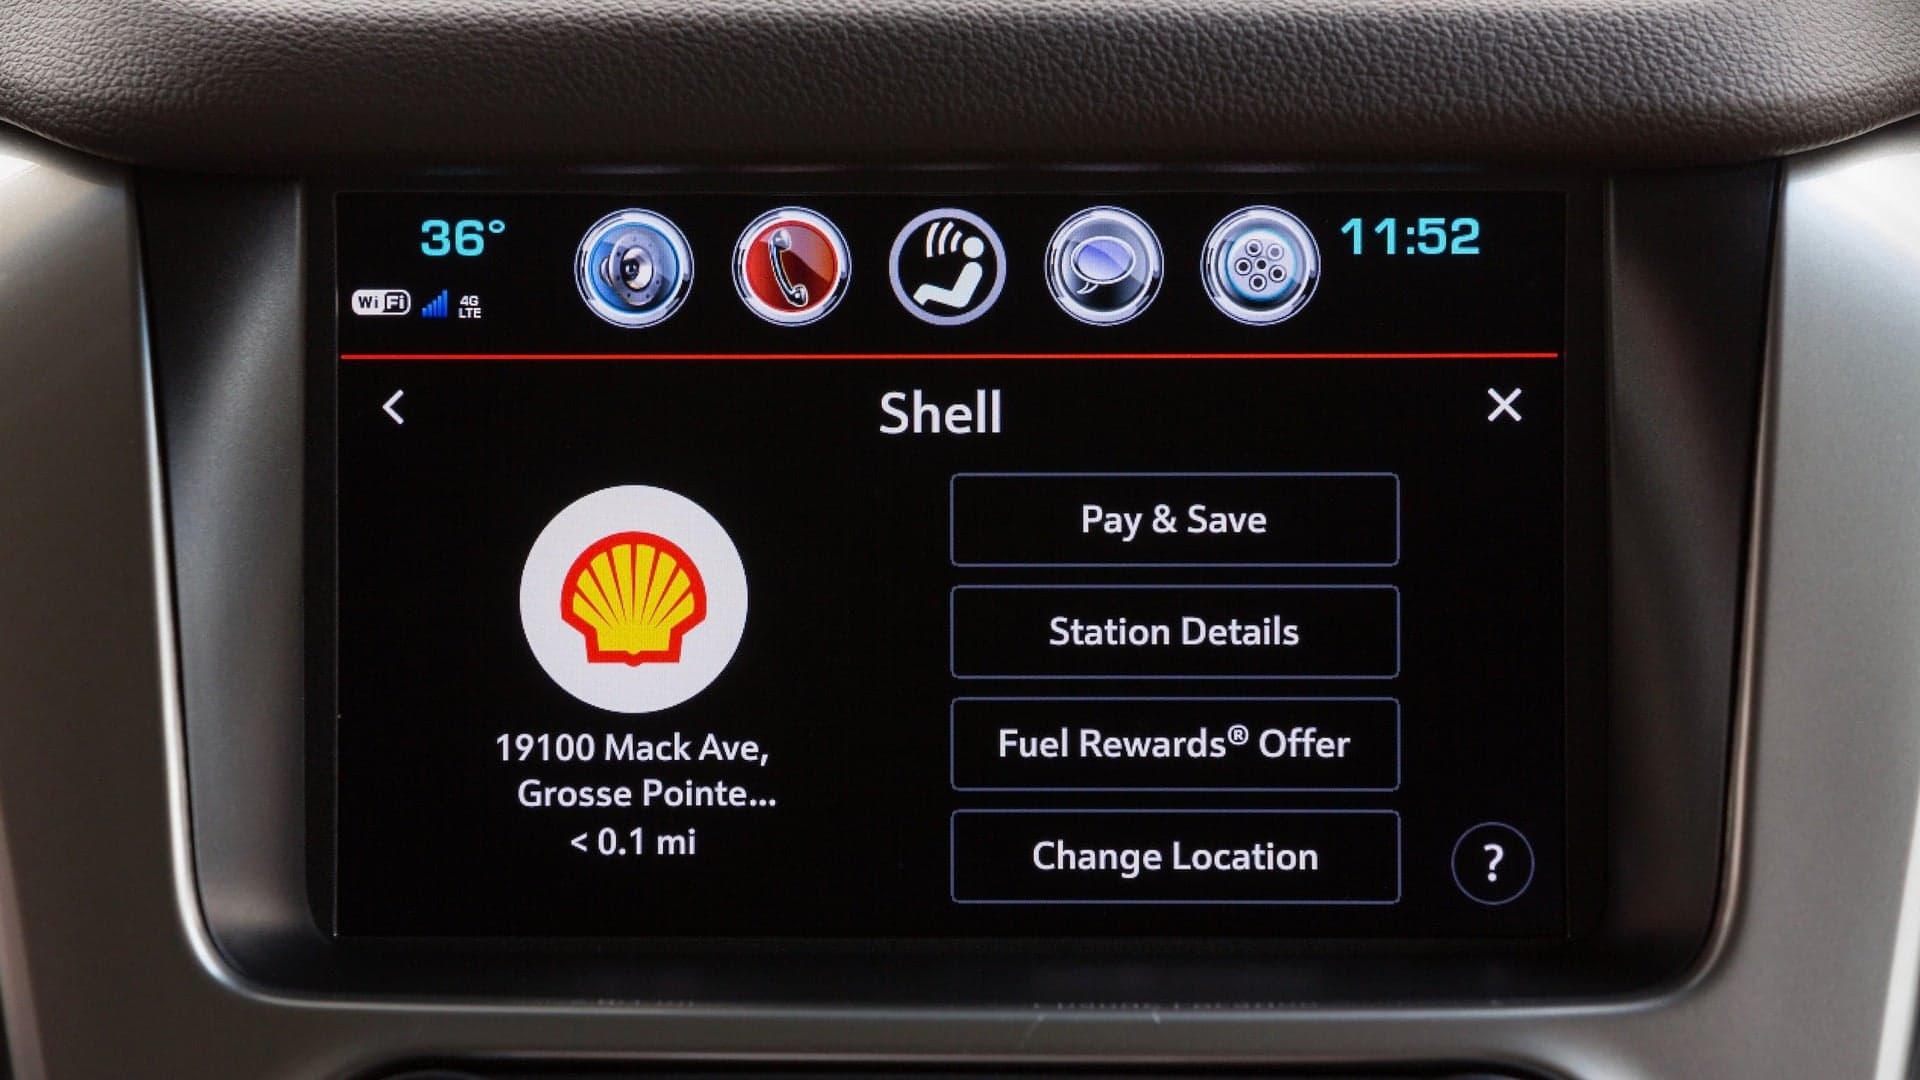 Chevy and Shell Let Owners Pay for Gas From Their Cars